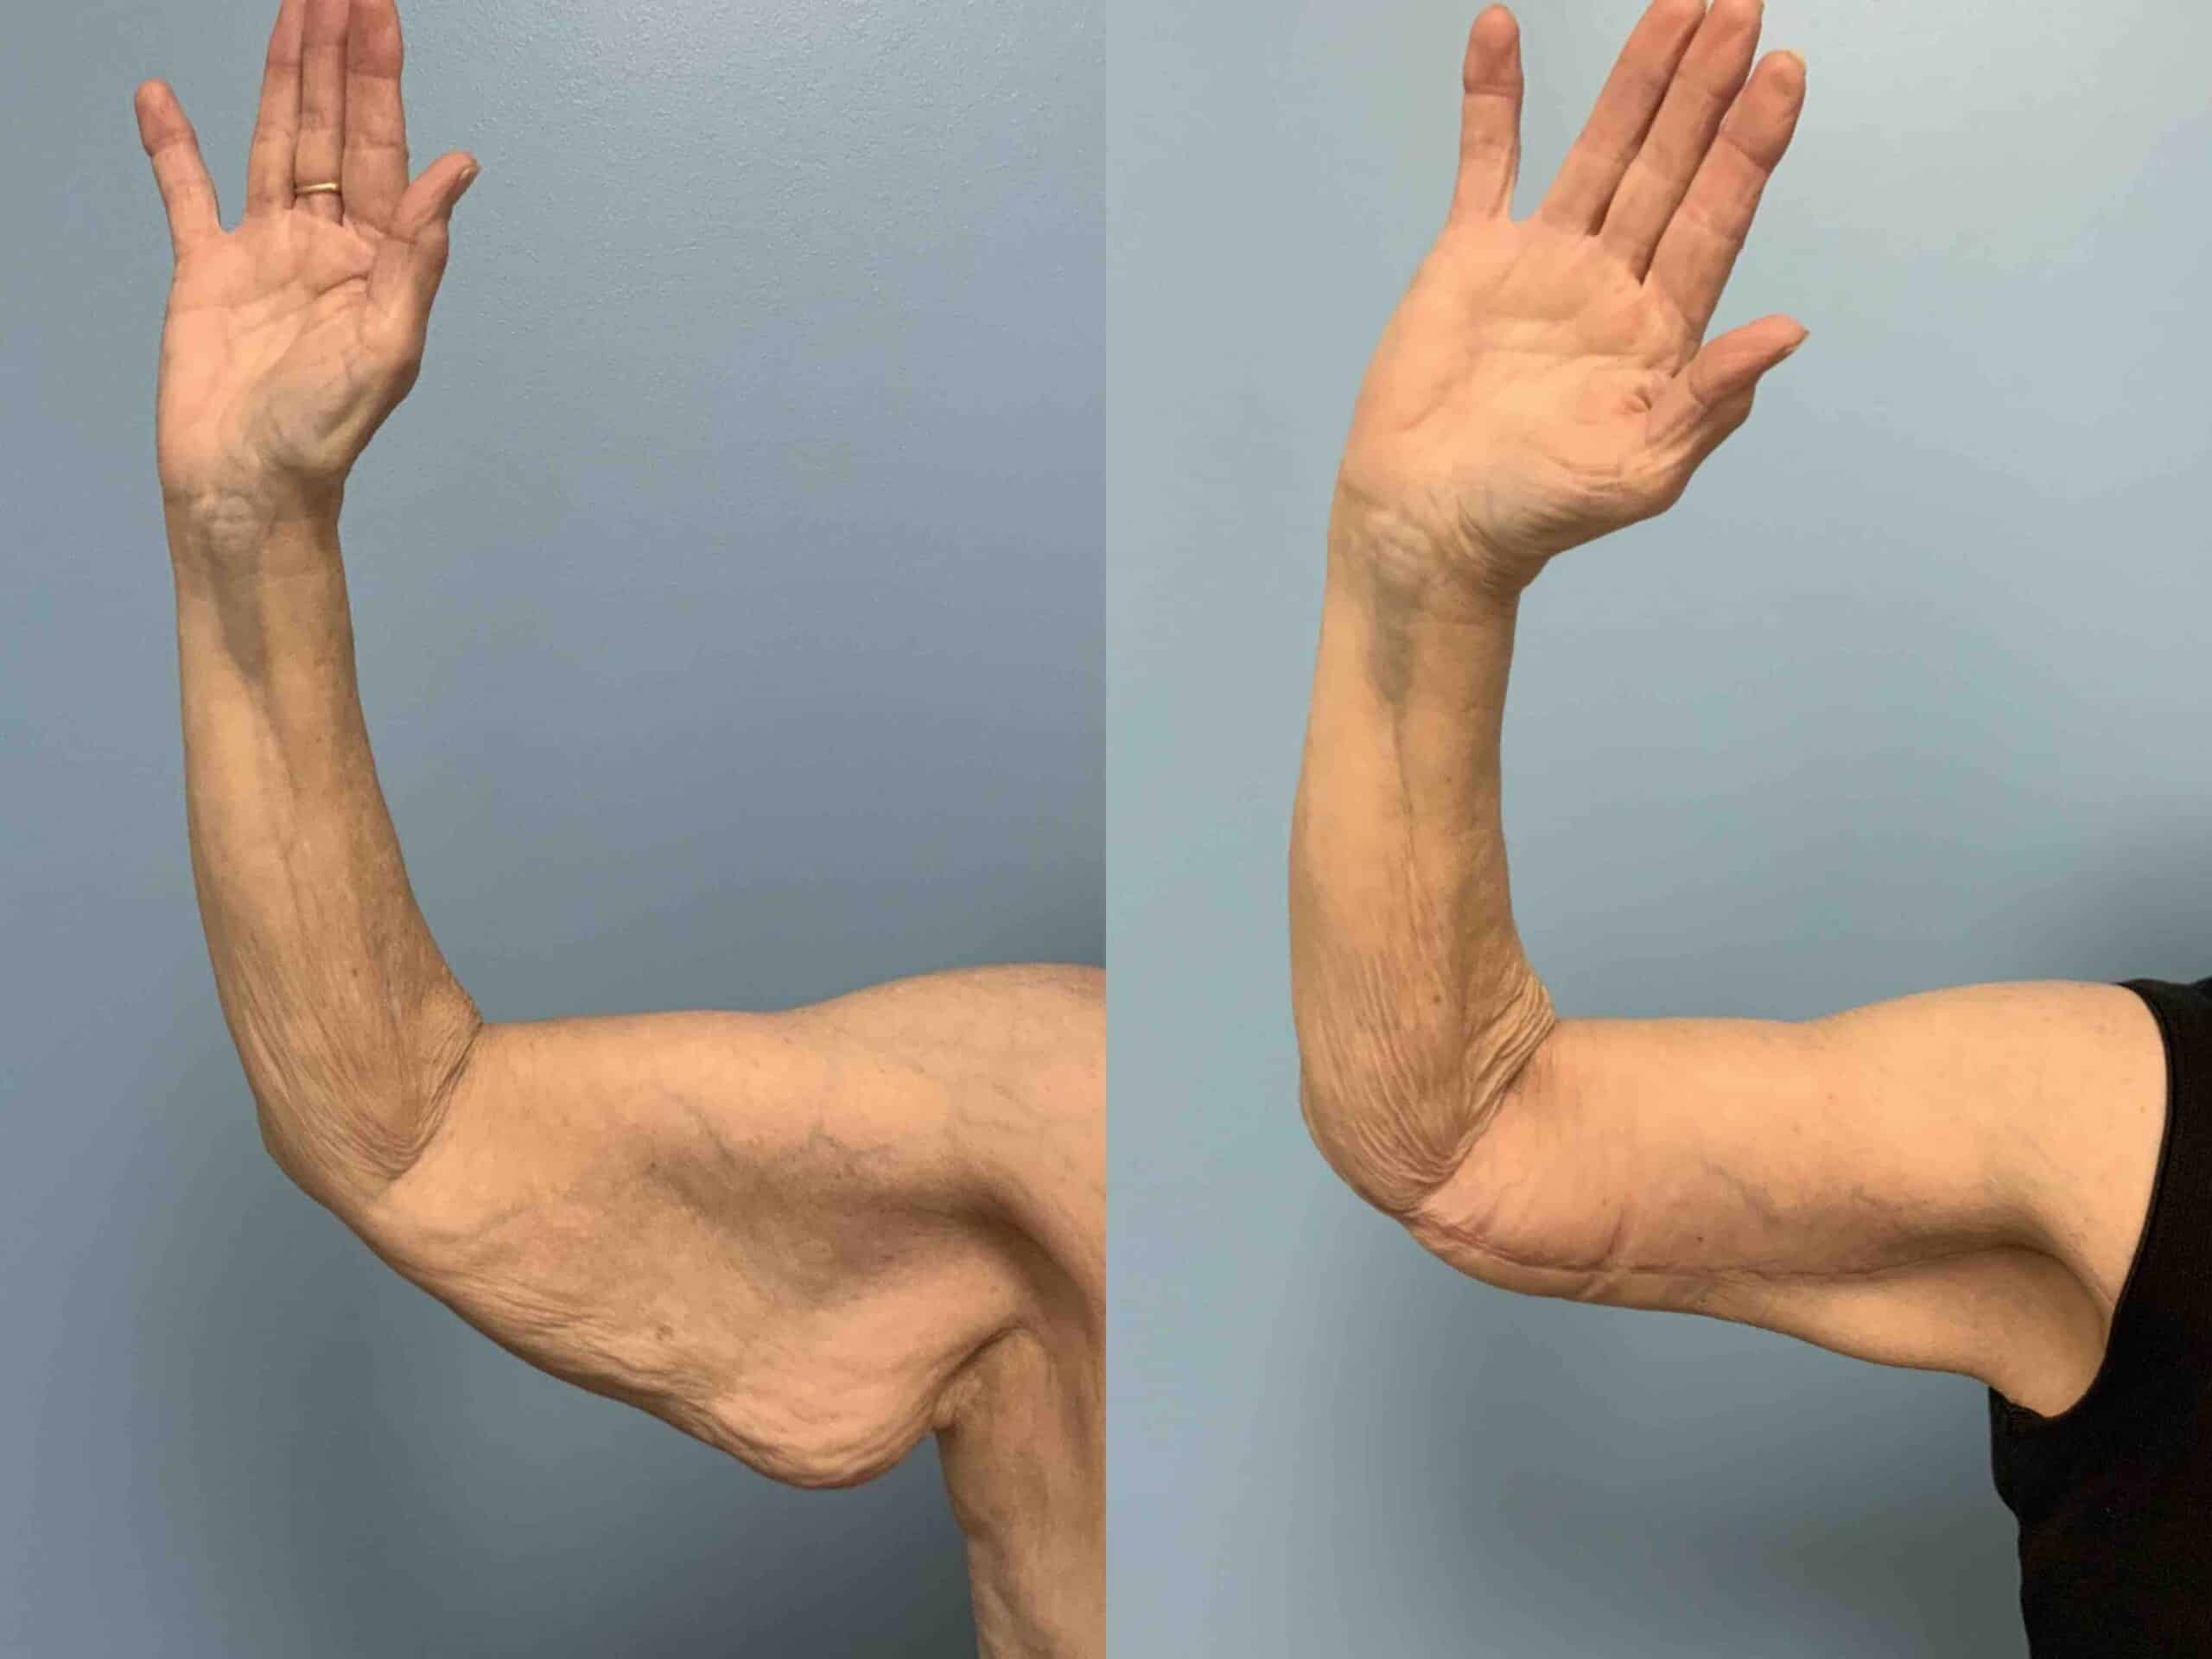 Before and after, patient 2 mo post op from Brachioplasty and VASER arms treatment performed by Dr. Paul Vanek